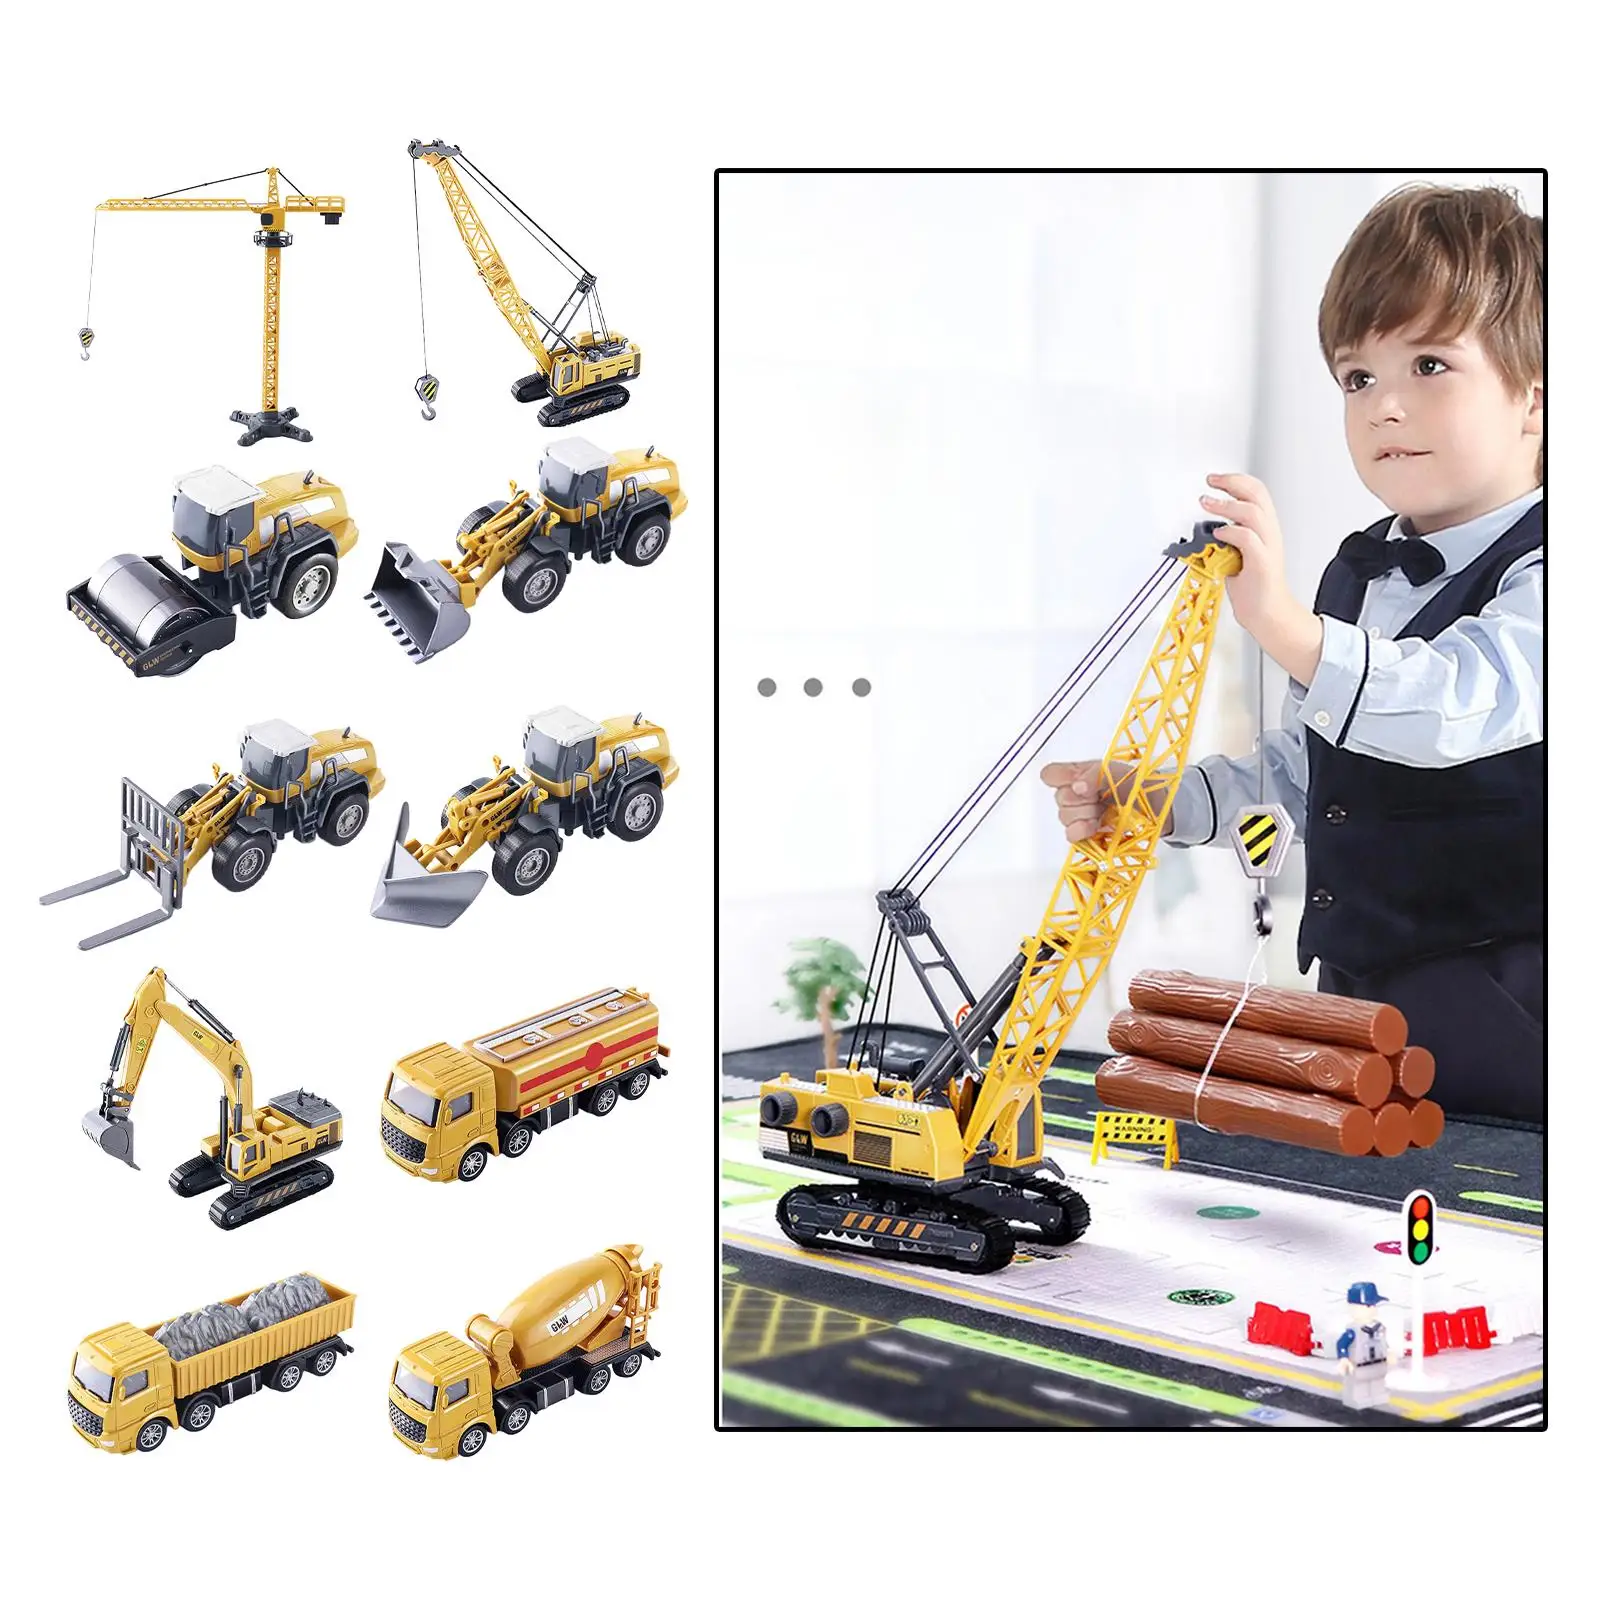 Construction Trucks Vehicles Toys Crane Forklift Digger 1:55 Scale Toy